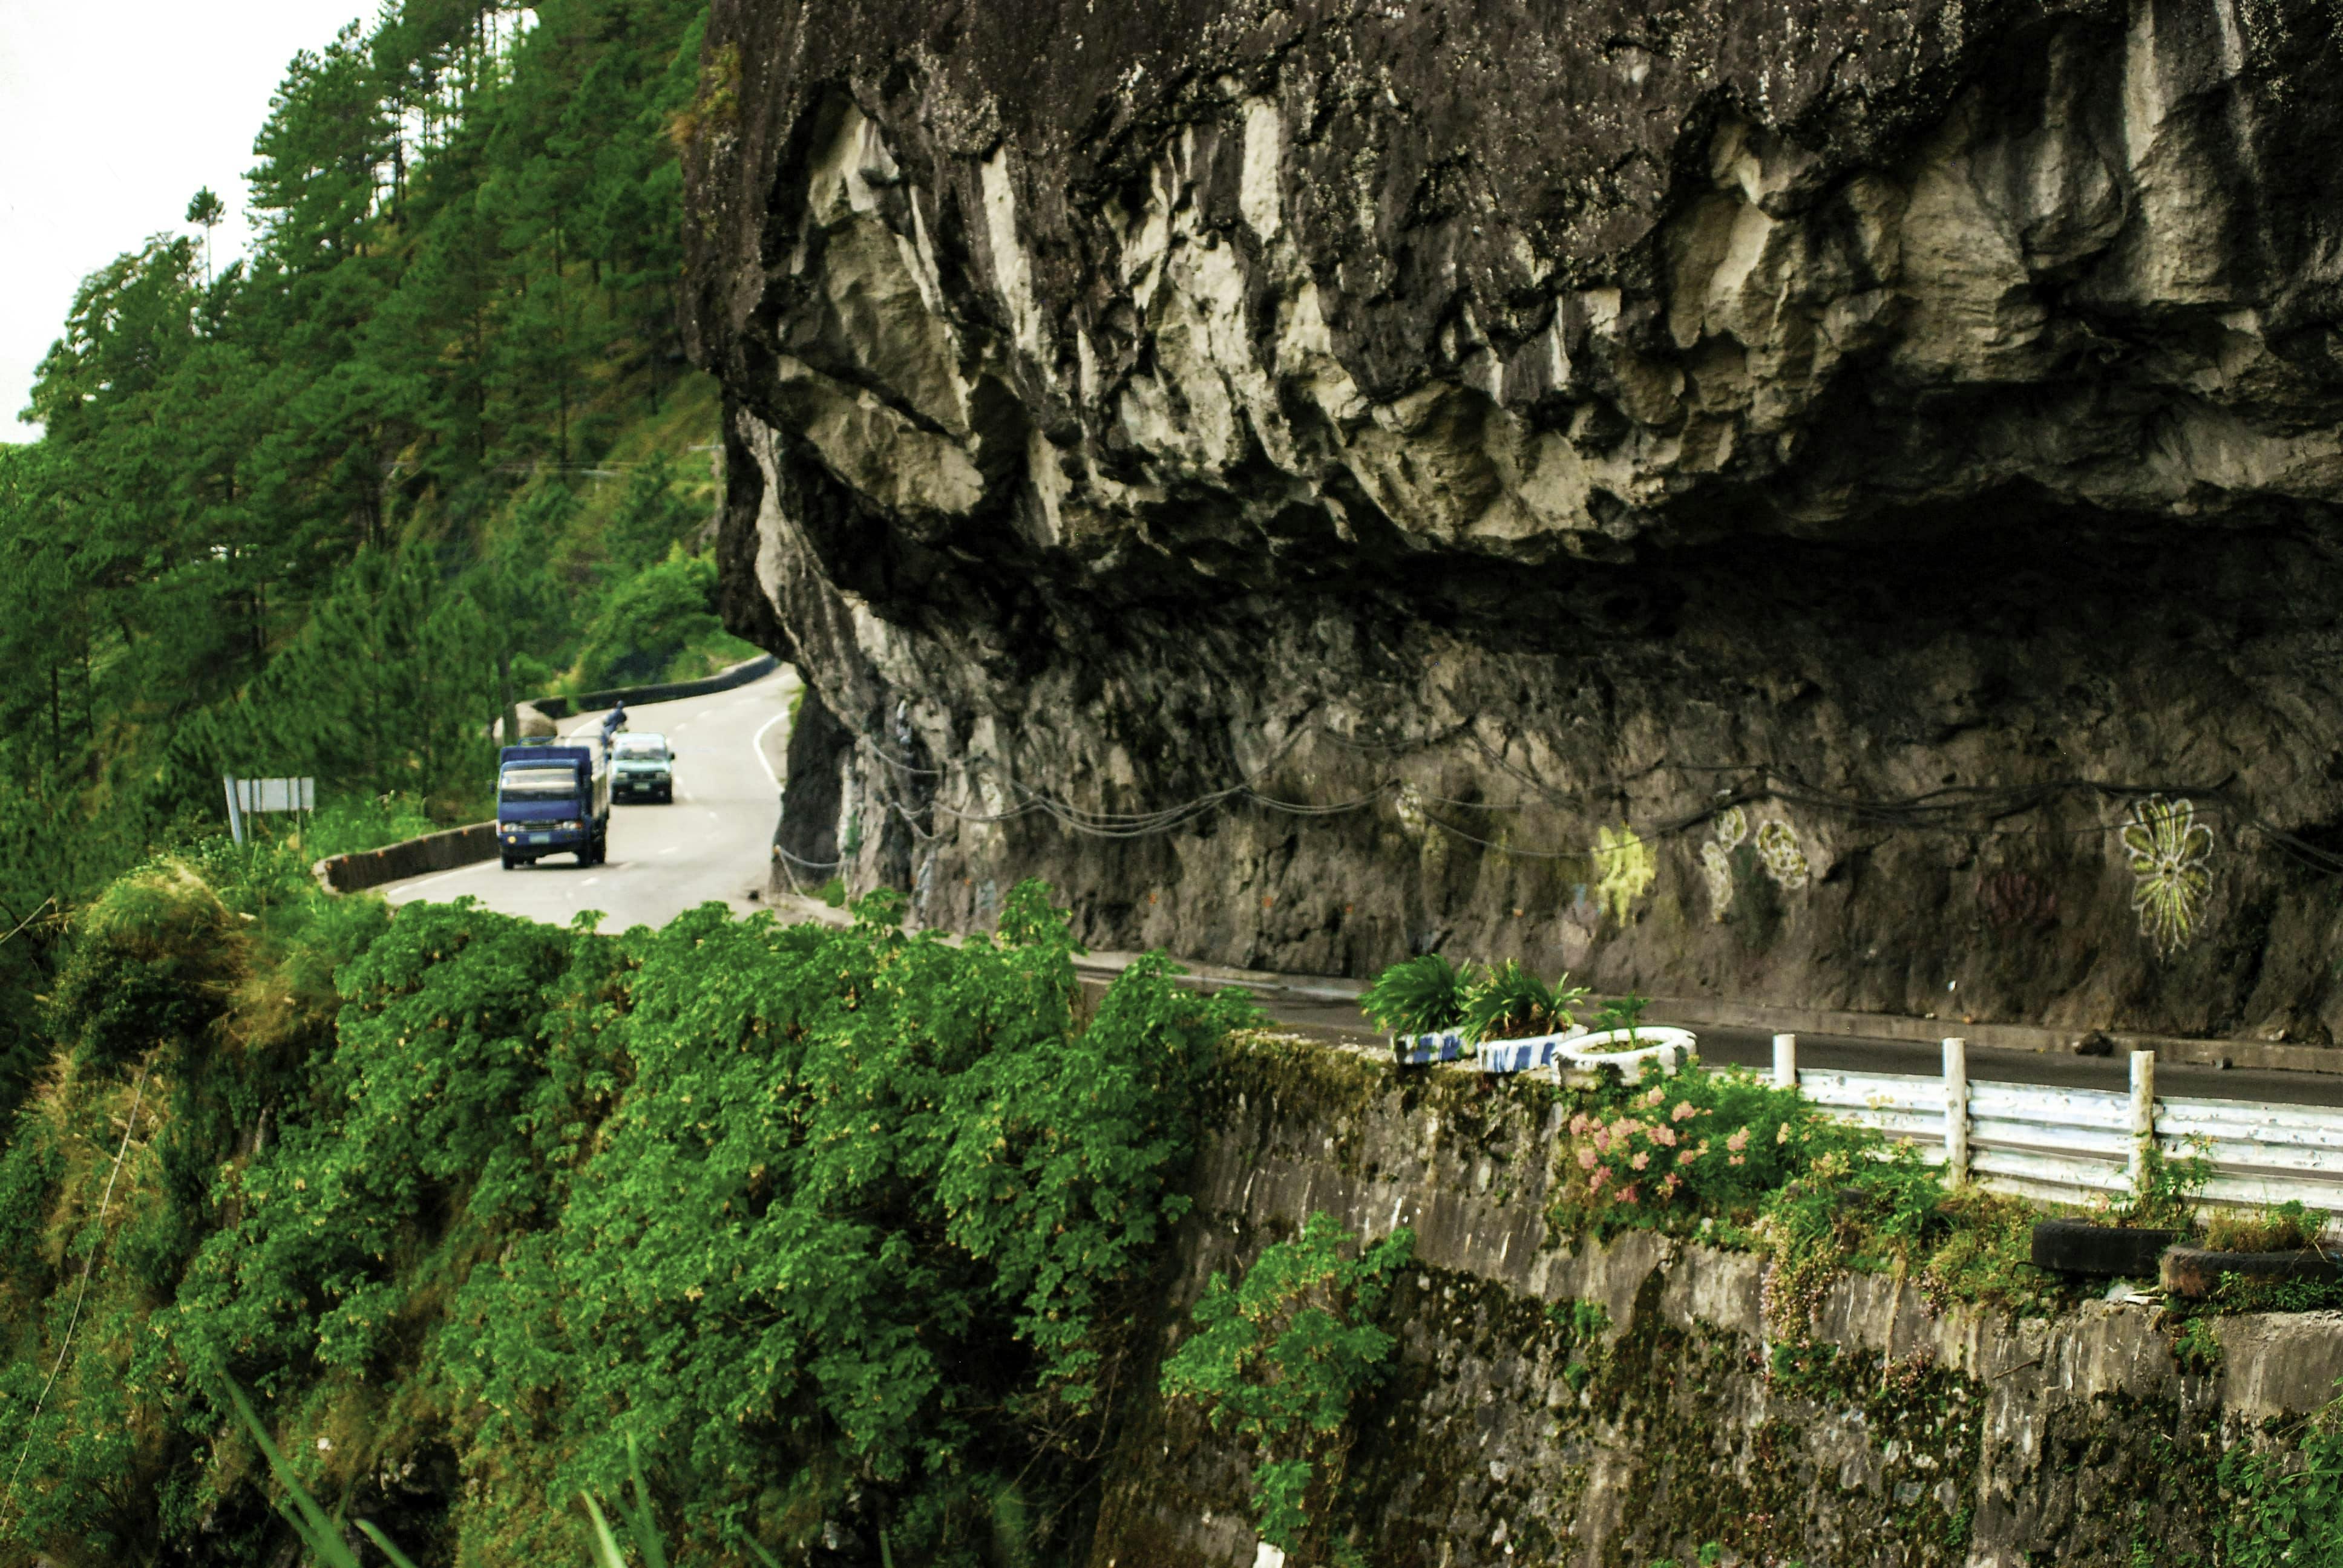 Halsema Highway in Benguet, one of the highest elevations in the Philippines